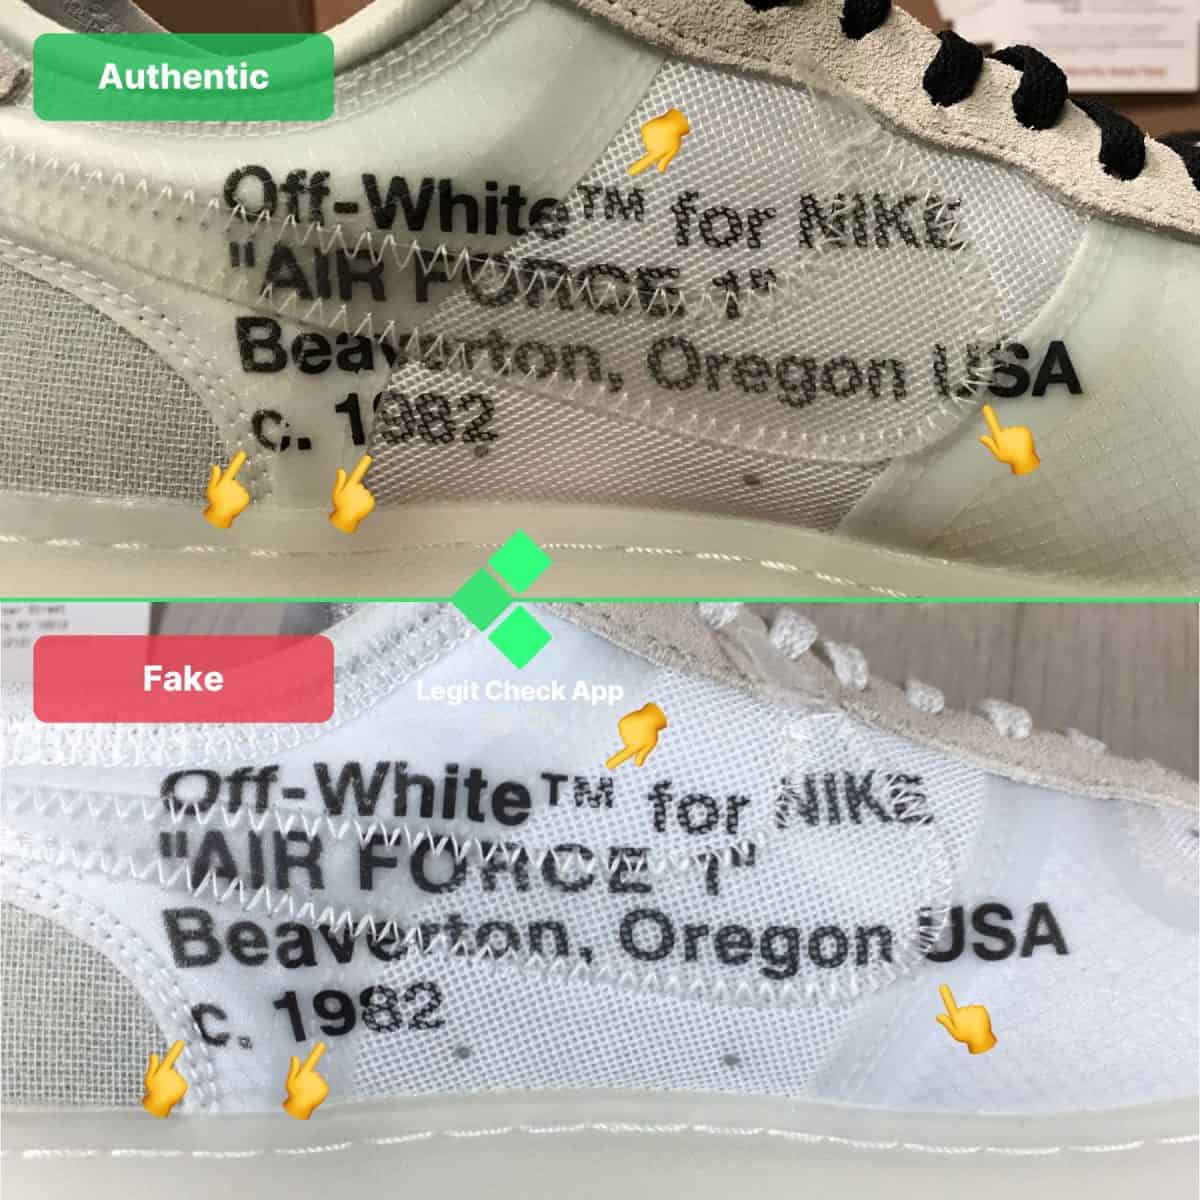 Real Vs Fake Off-White Air Force 1 